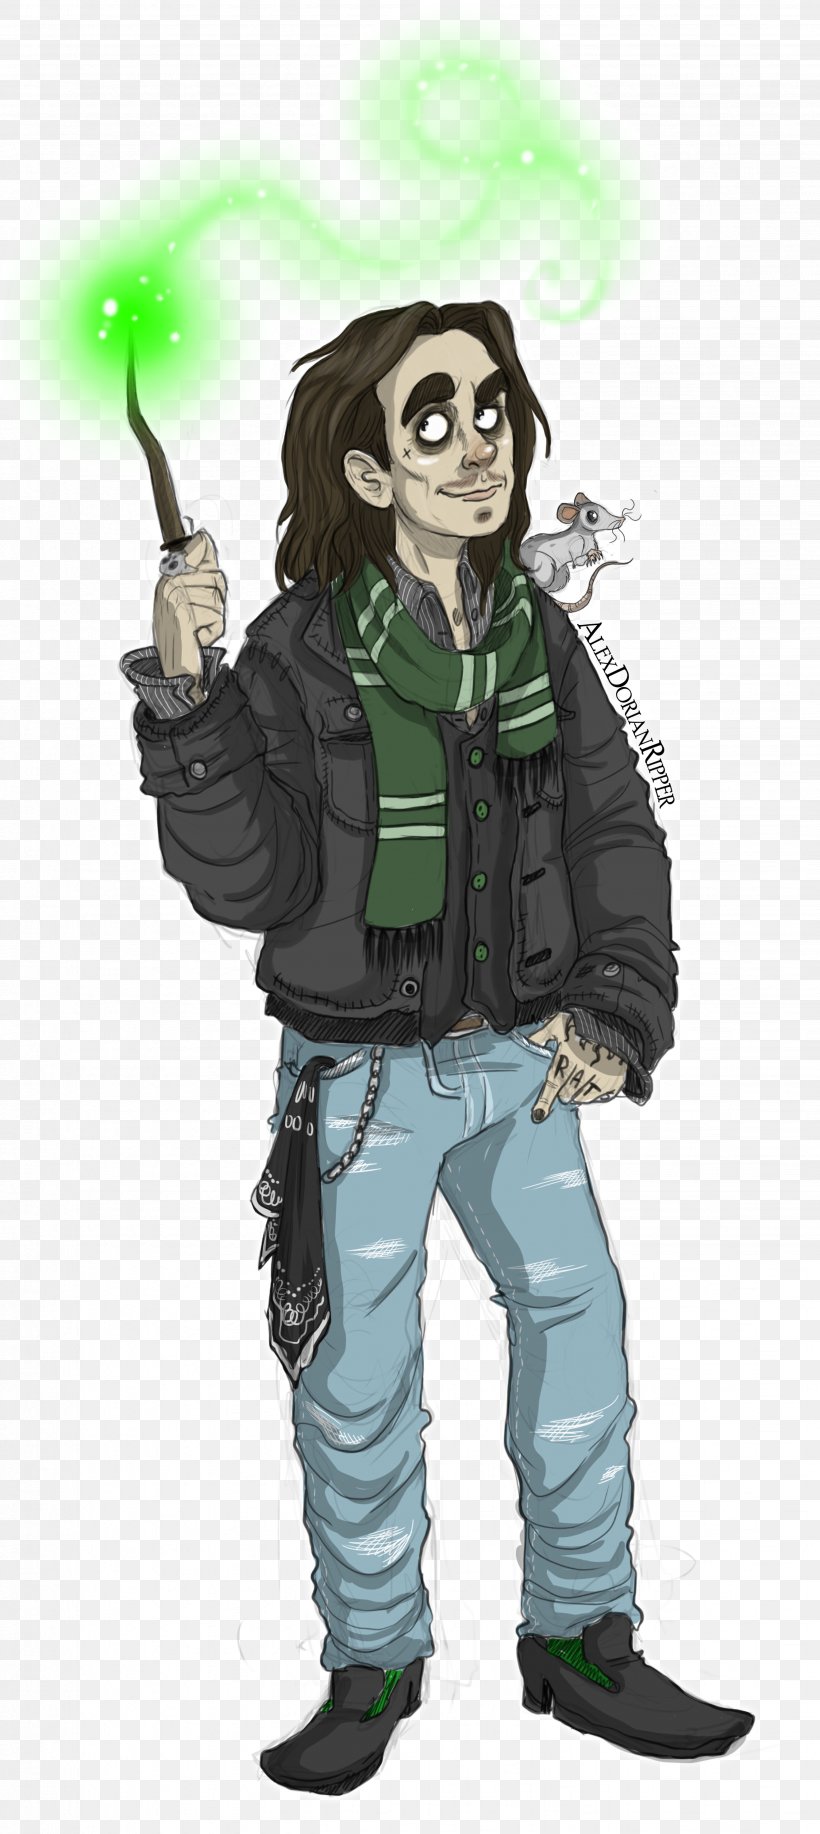 Harry Potter (Literary Series) Professor Severus Snape Hogwarts School Of Witchcraft And Wizardry Fan Art, PNG, 2673x5980px, Harry Potter Literary Series, Art, Costume Design, Deviantart, Drawing Download Free